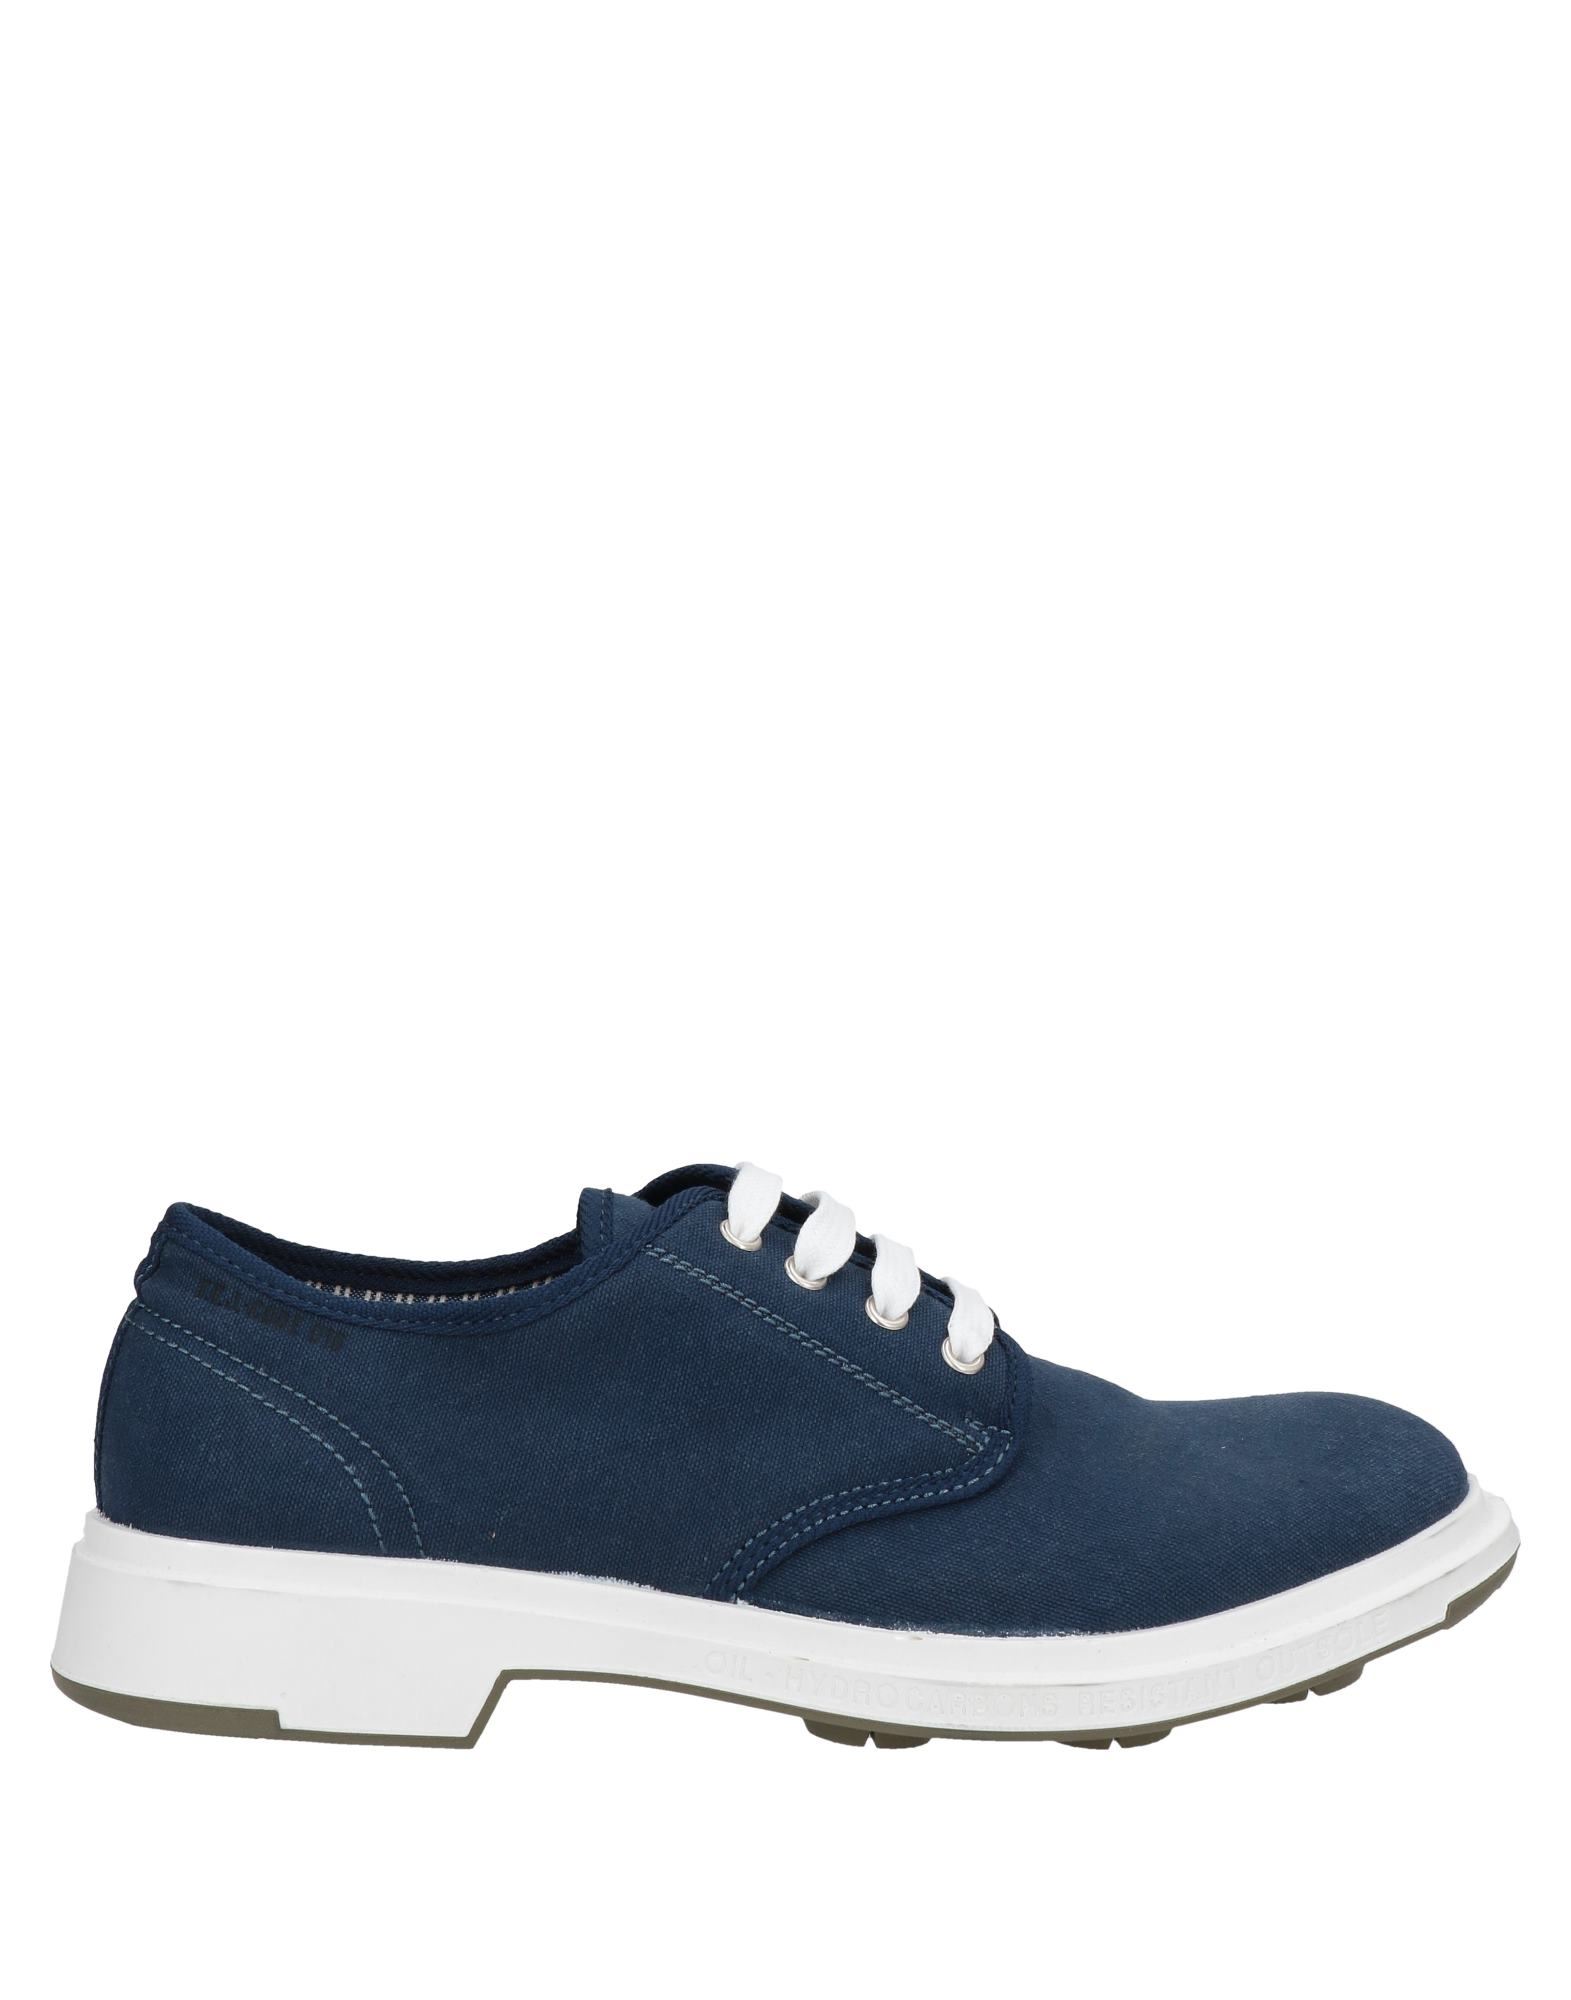 Pezzol 1951 Lace-up Shoes In Dark Blue